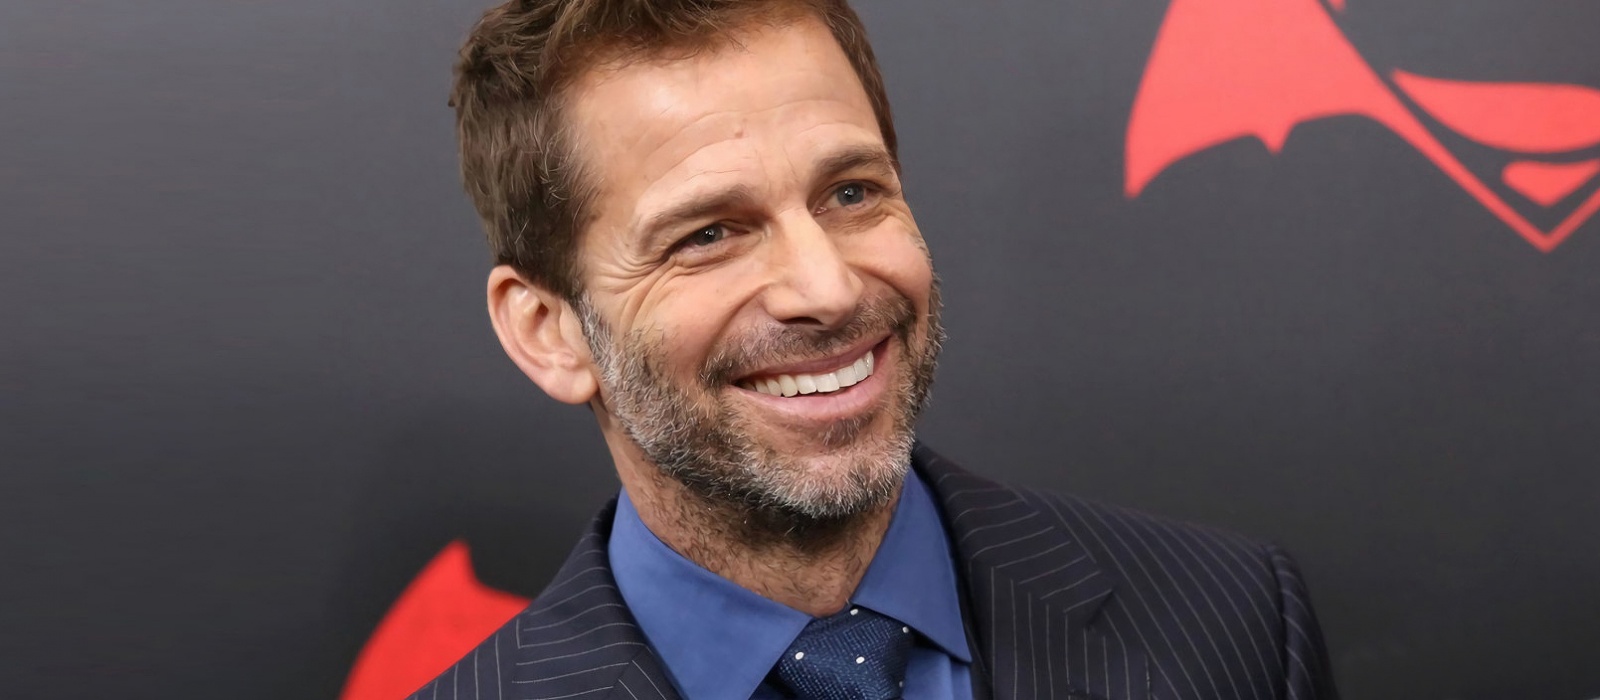 Zack Snyder will get the go-ahead for a "Gears of War" film adaptation from the game's creator Cliff Blesinski, but only on one important condition